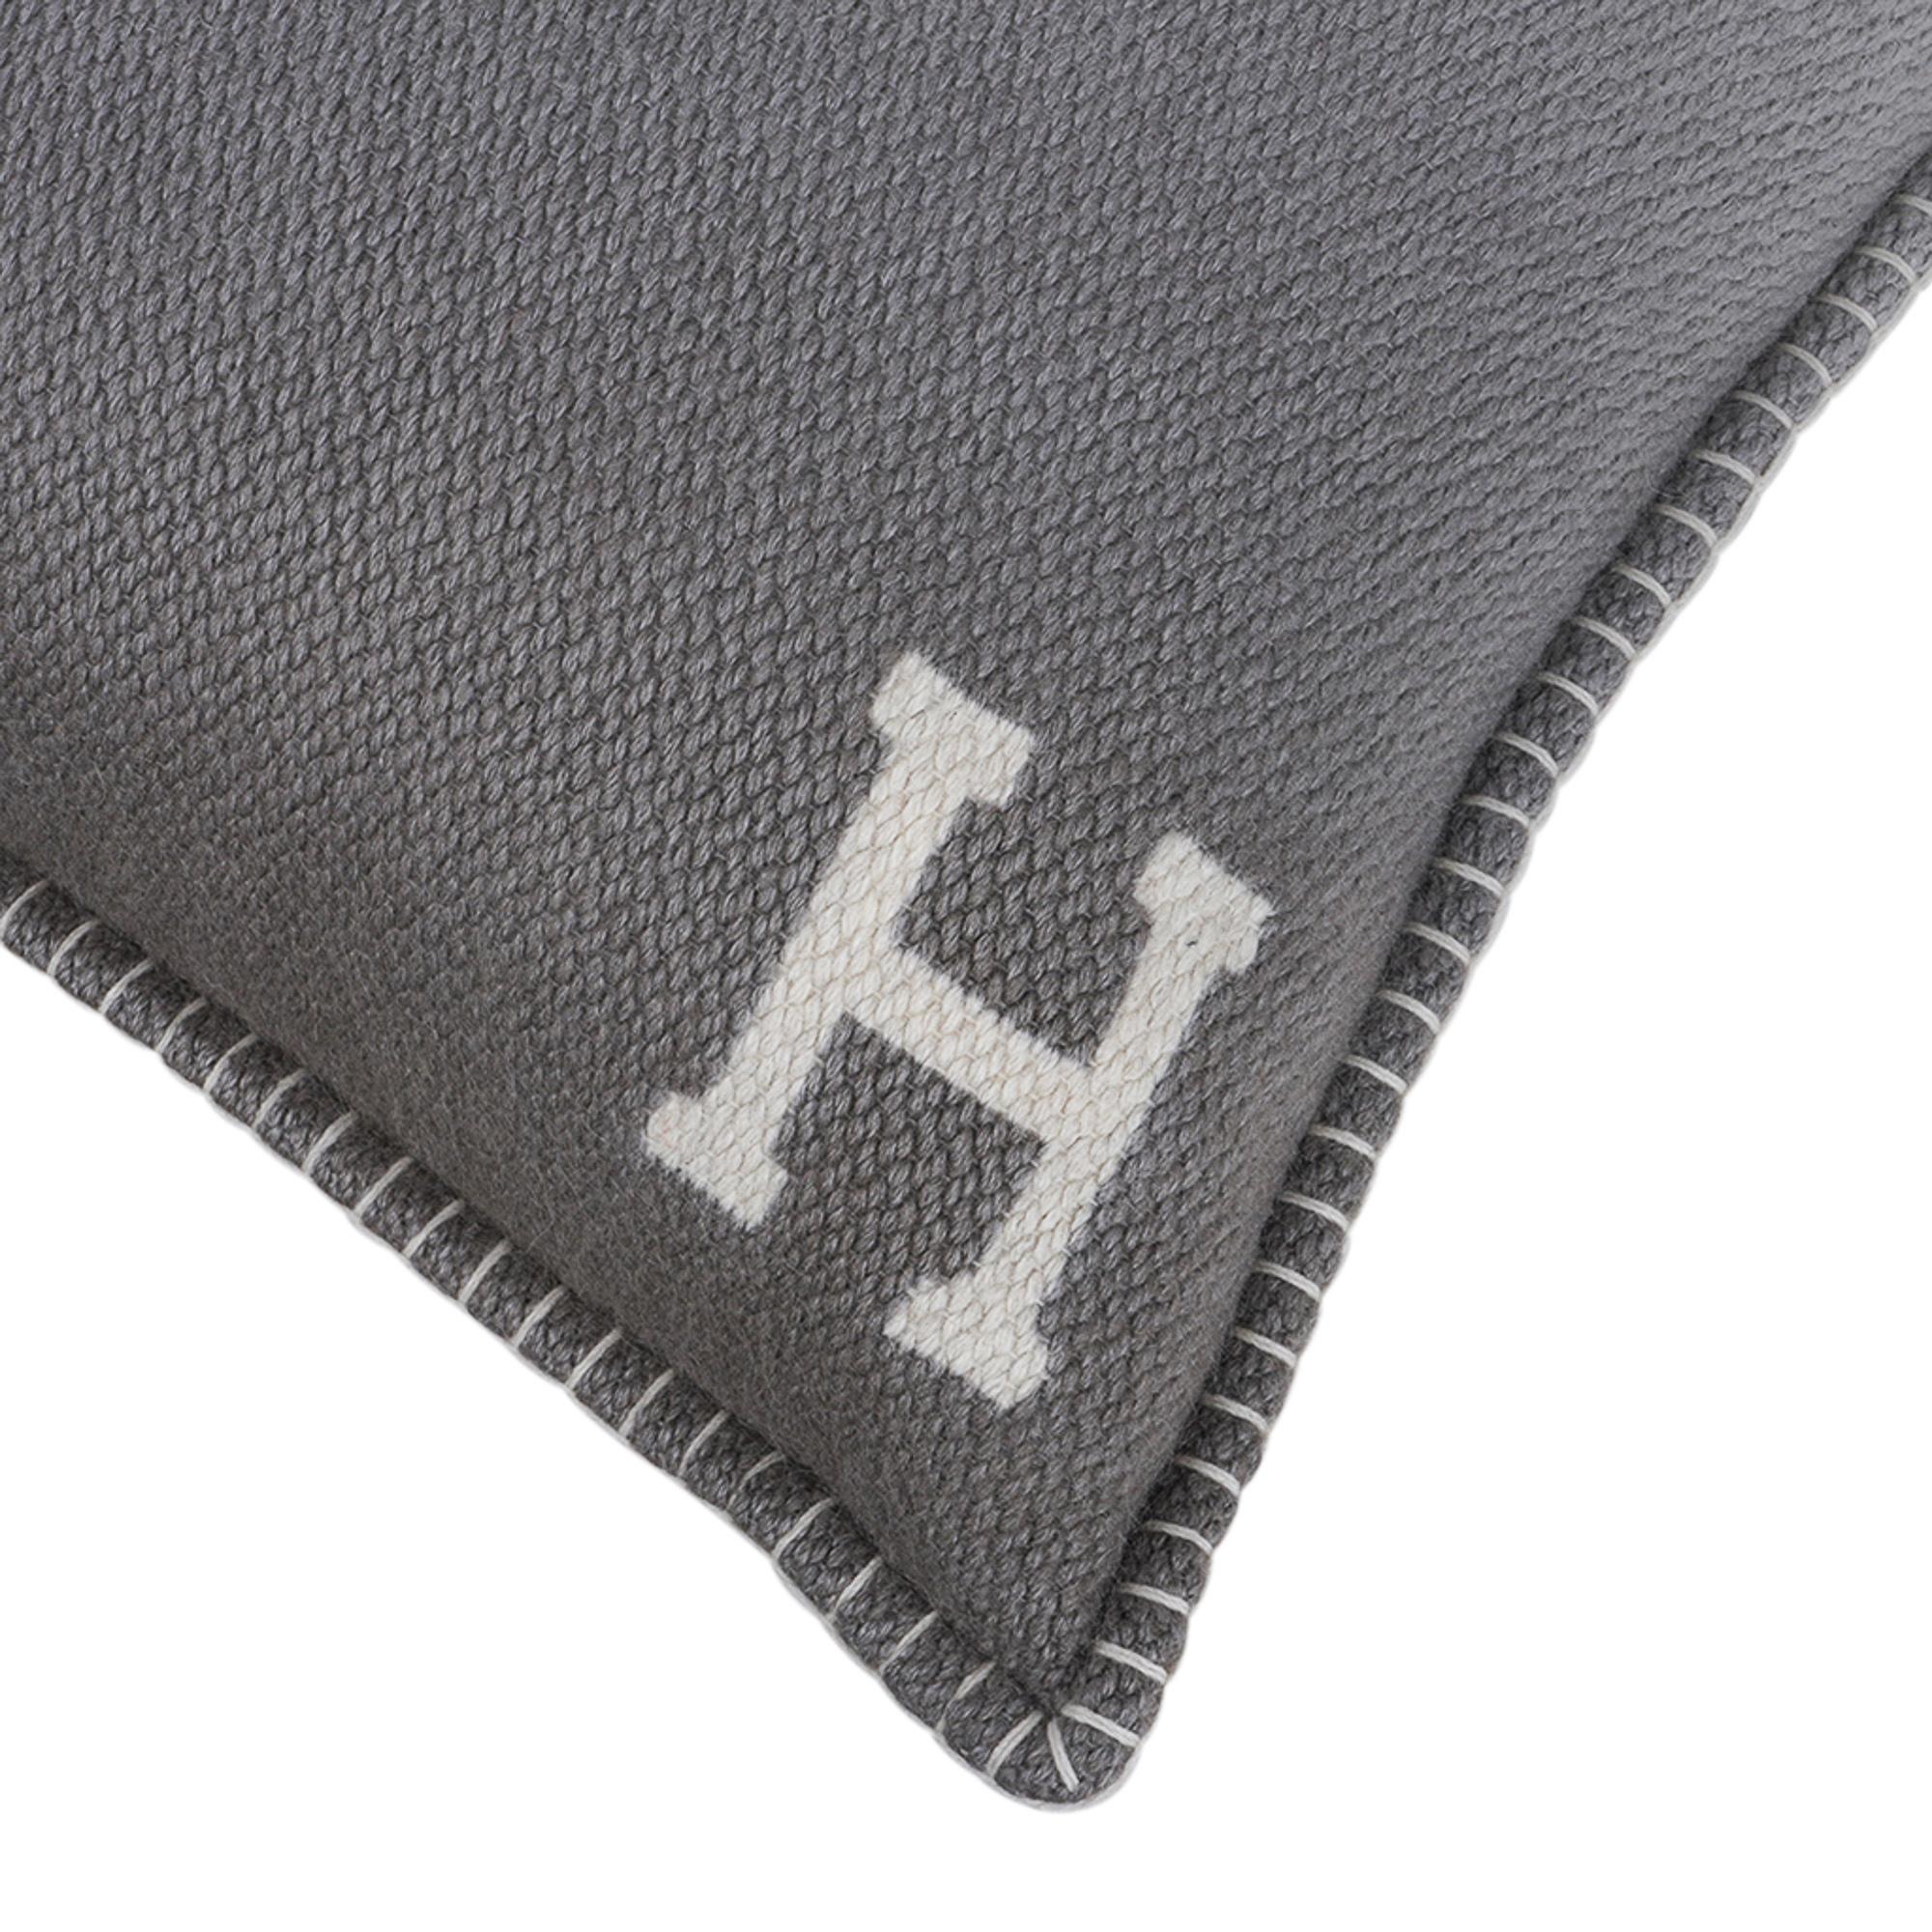 Mightychic offers an Hermes Yak n' Dye pillow featured in an Ombre finish.
Soft hand spun Tibetan Yak with Gris Ombre on front and Naturel Ombre on rear.
Subtle H on corner.
Cocotte stitch on edges.
Hidden zip.
Please see the matching Yack 'n Dye